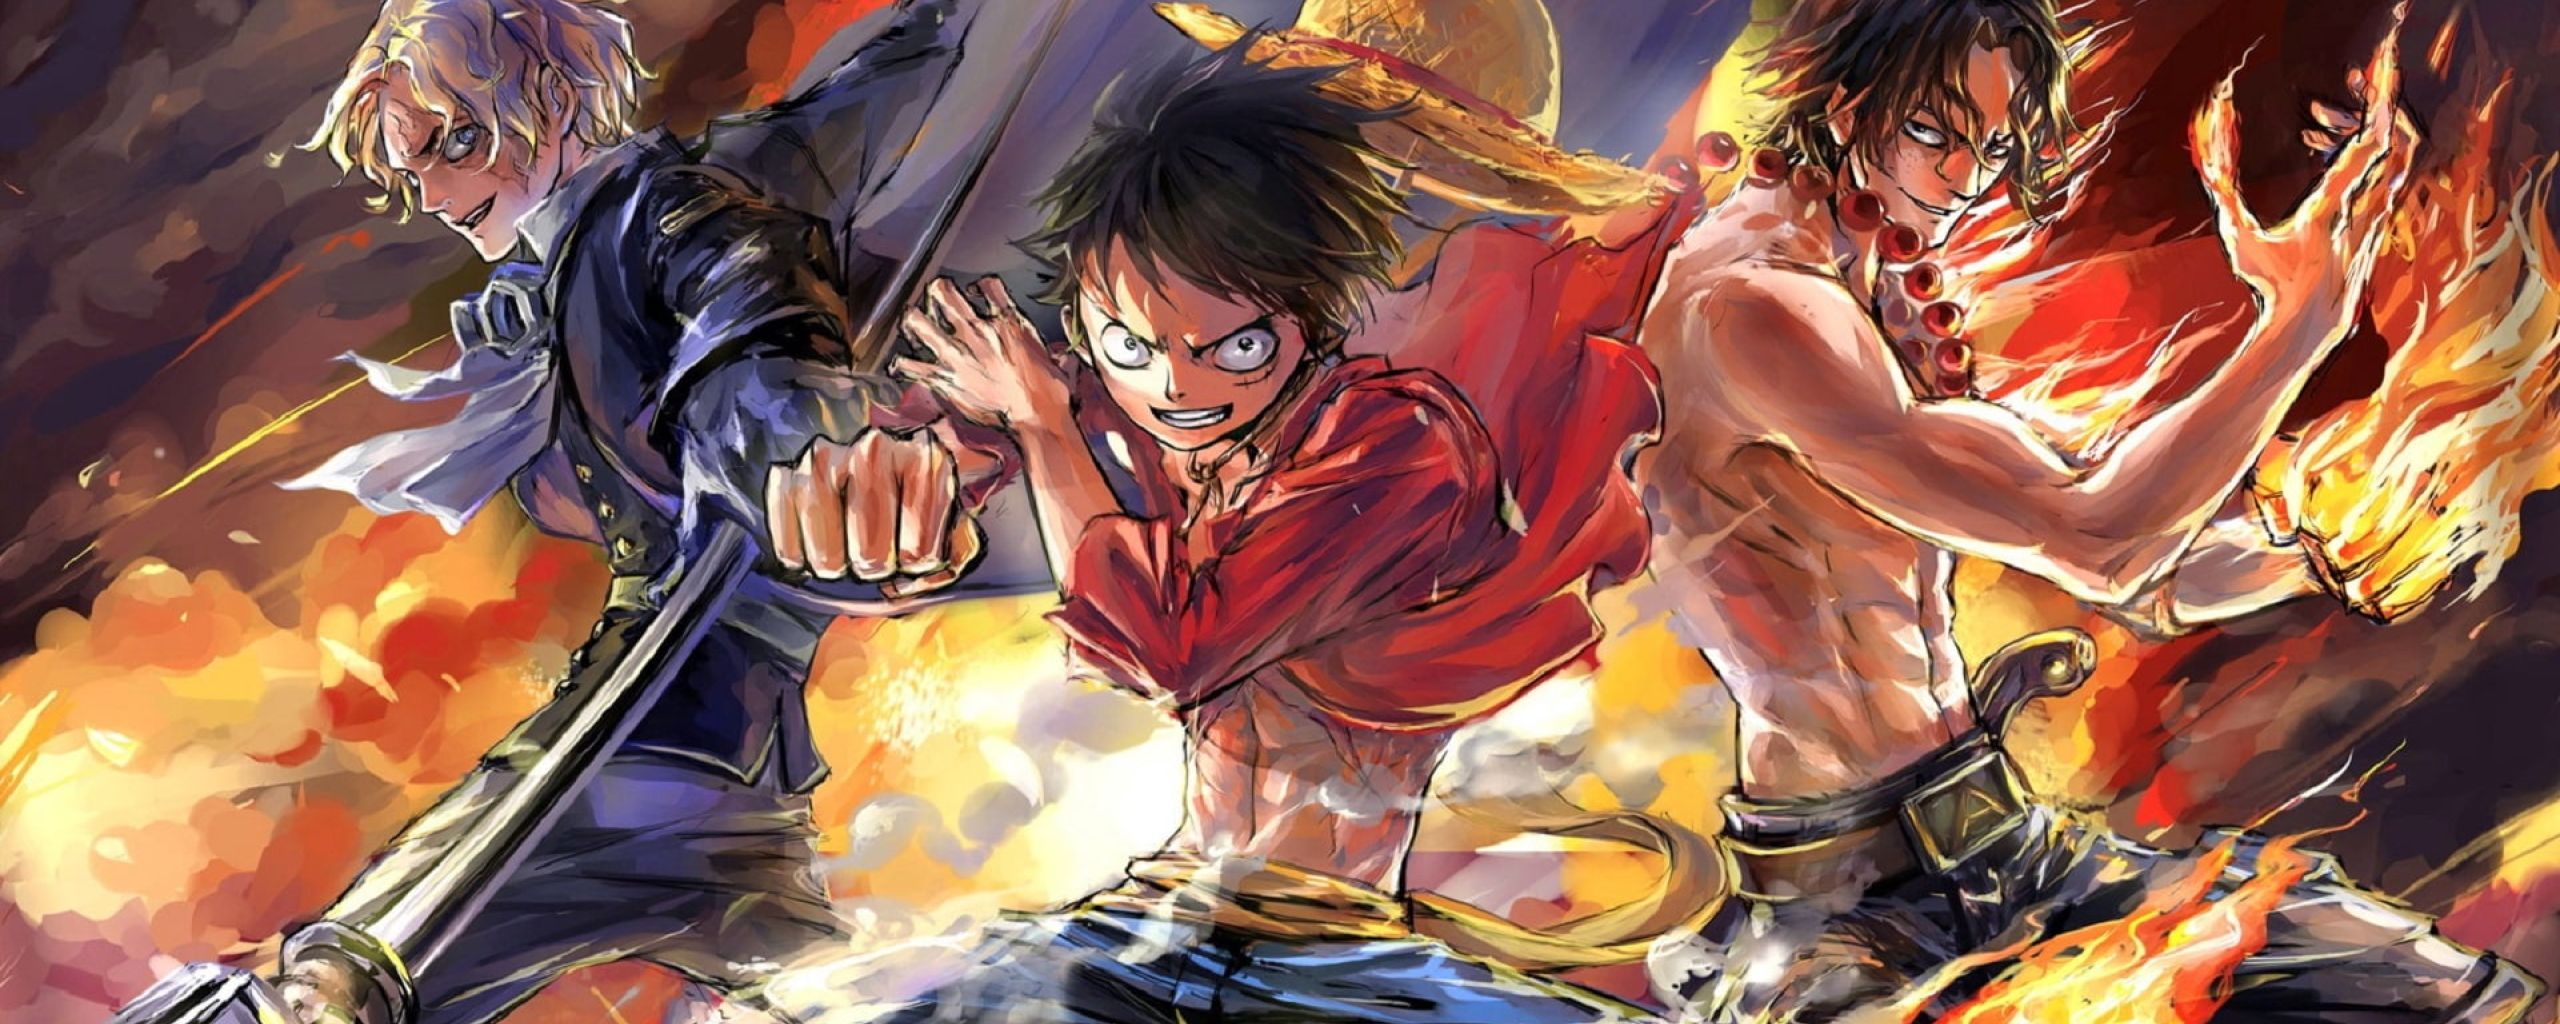 Ace Sabo Luffy Wallpapers - Wallpaper Cave